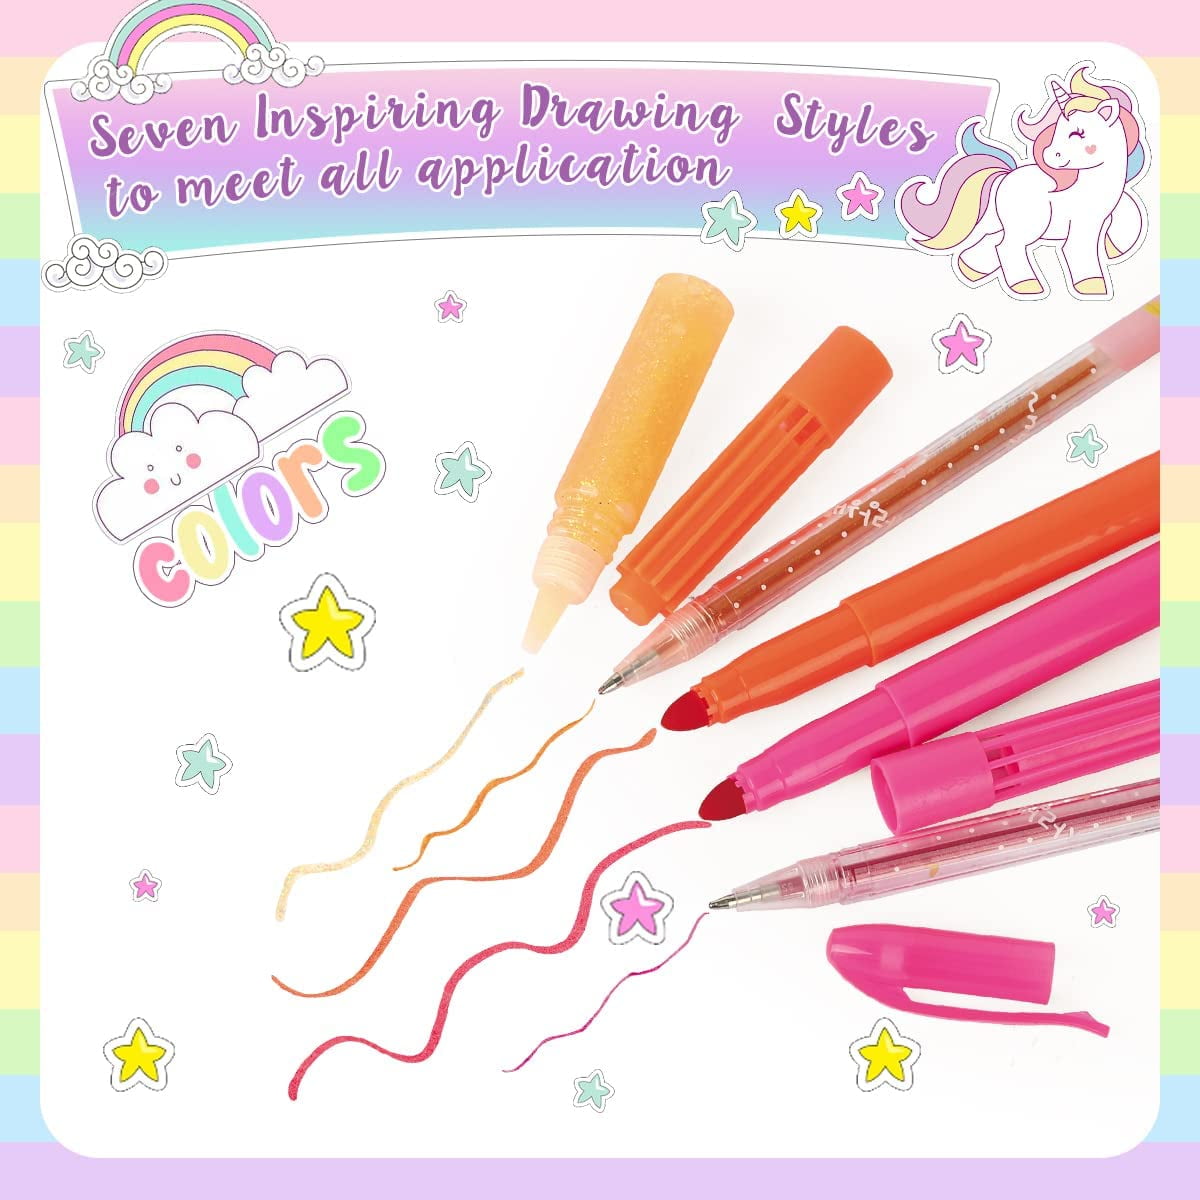 Unicorn Markers Set Gifts for Girls: Coloring Scented Markers Kit with  Unicorns Pencil Case - 66PCS Art School Supplies Drawing Toys Age -  Birthday